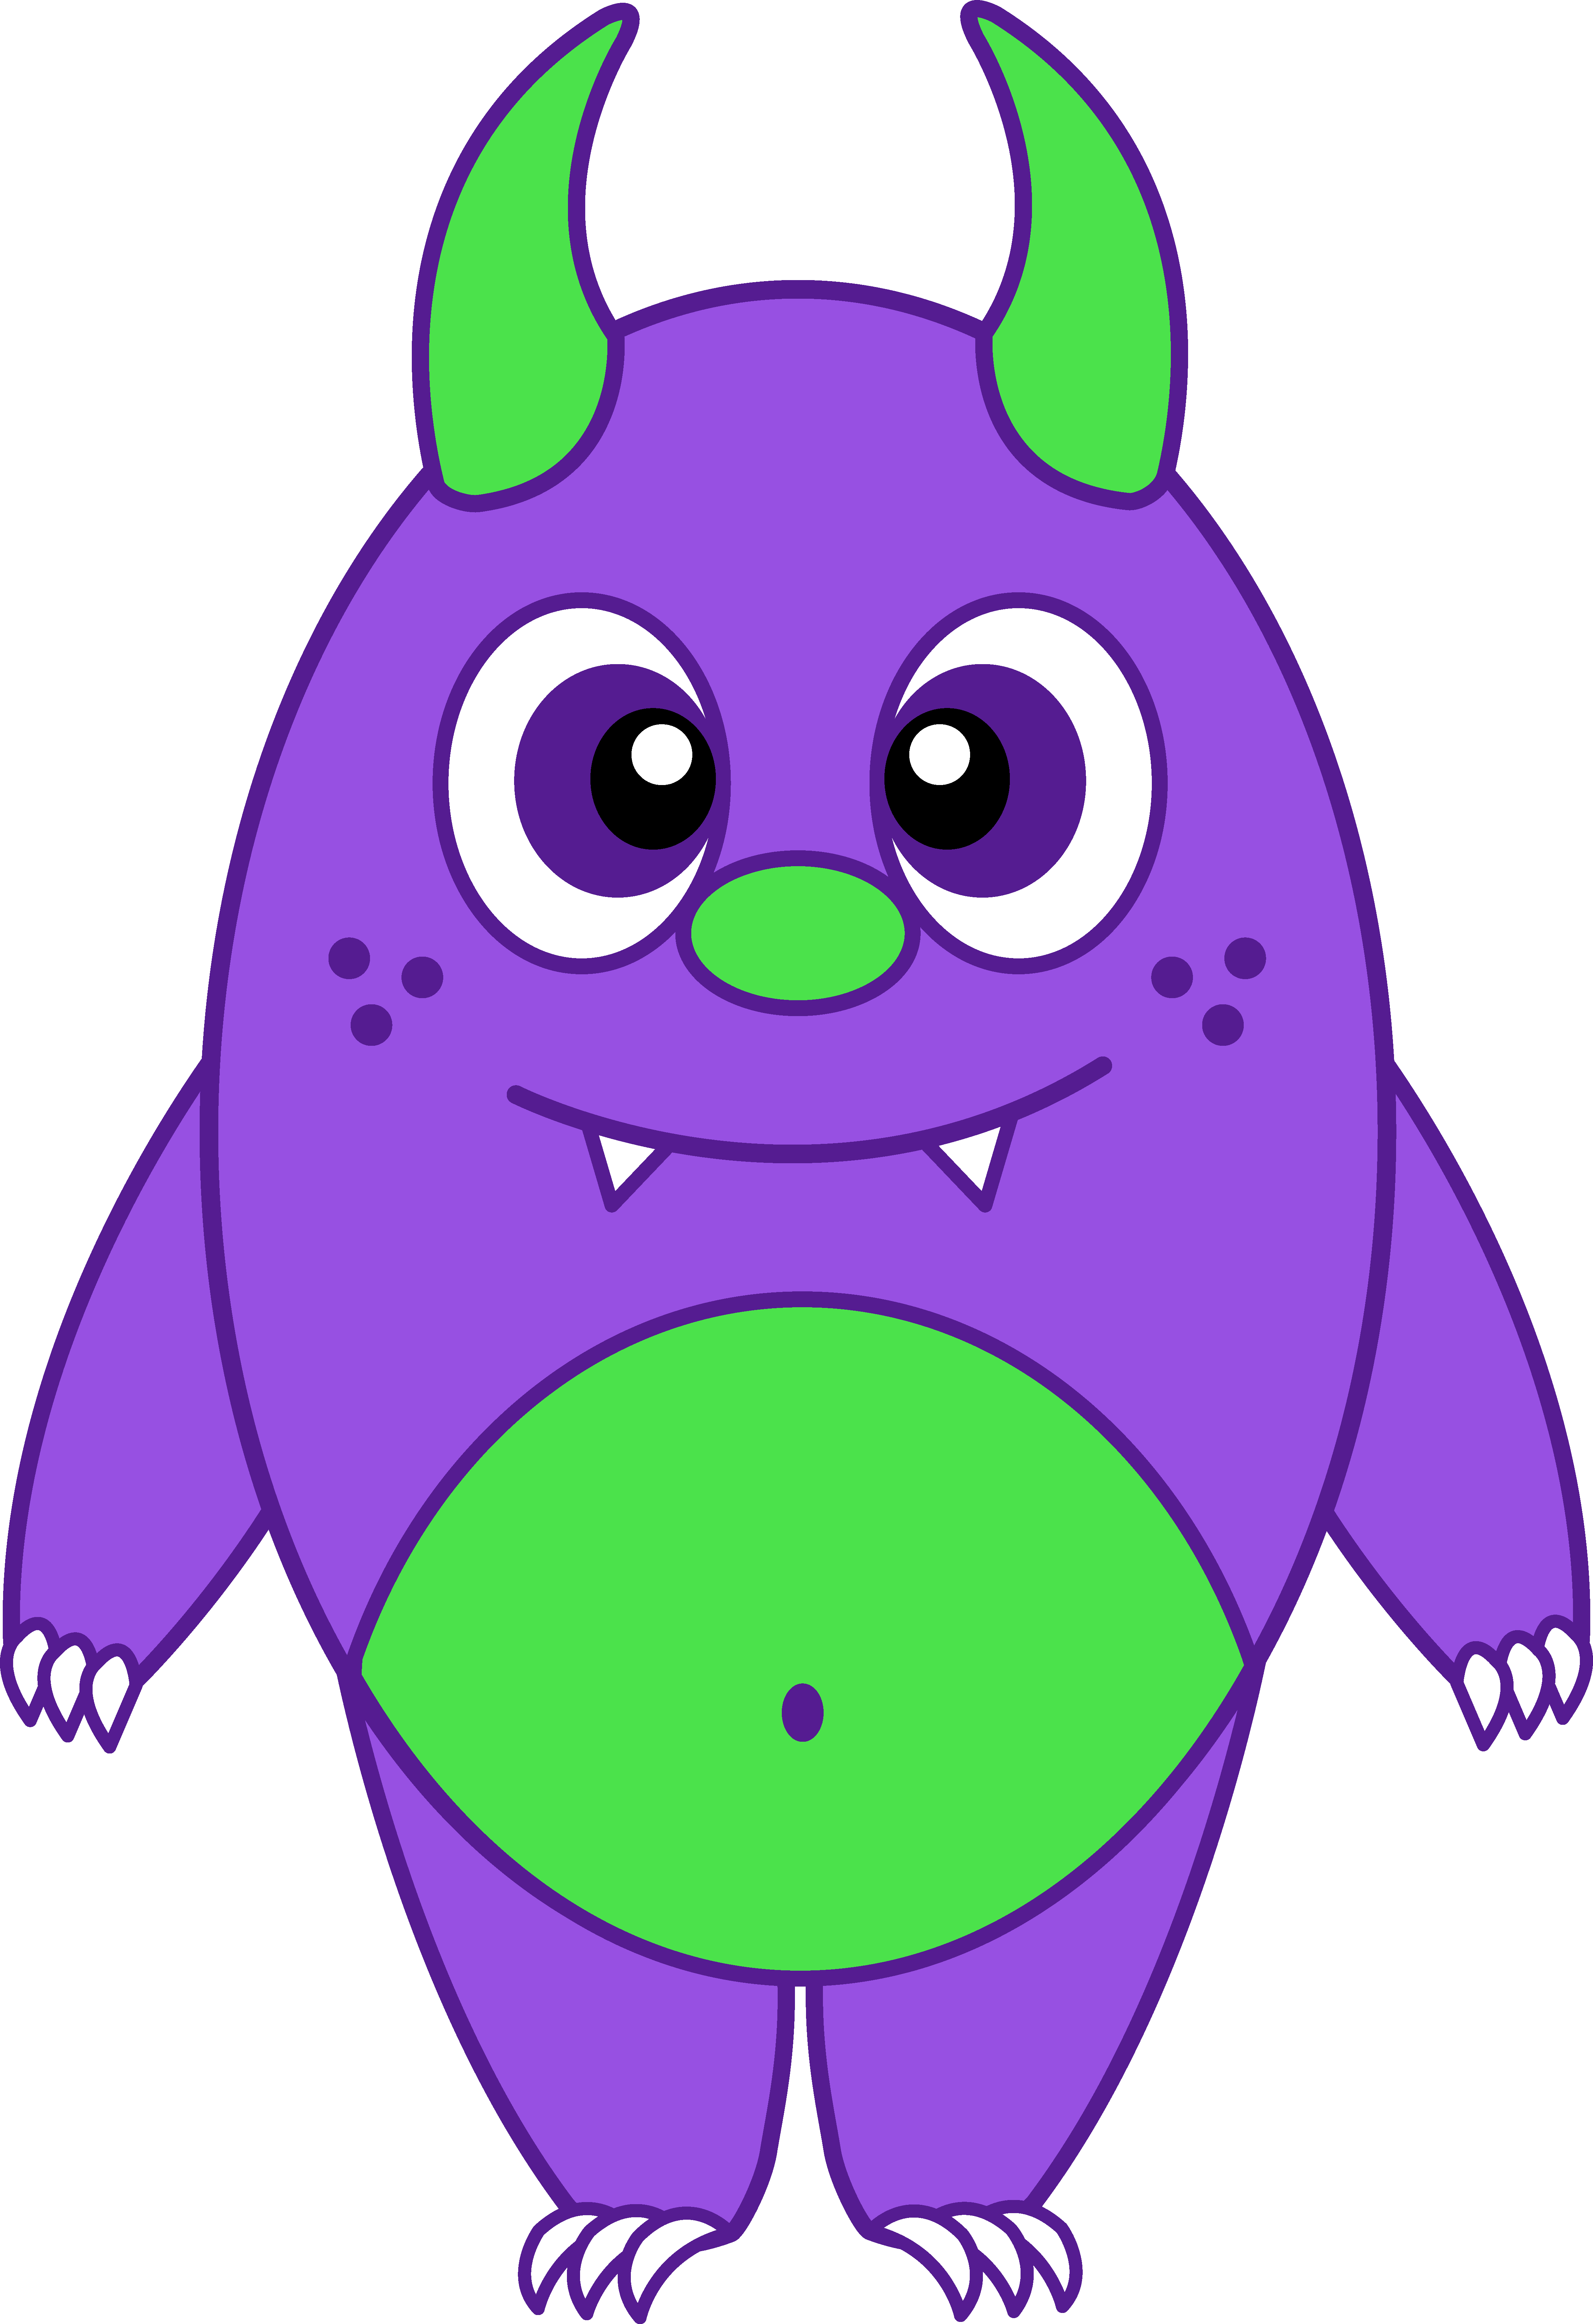 Funny - Purple And Green Monster (4611x6729)